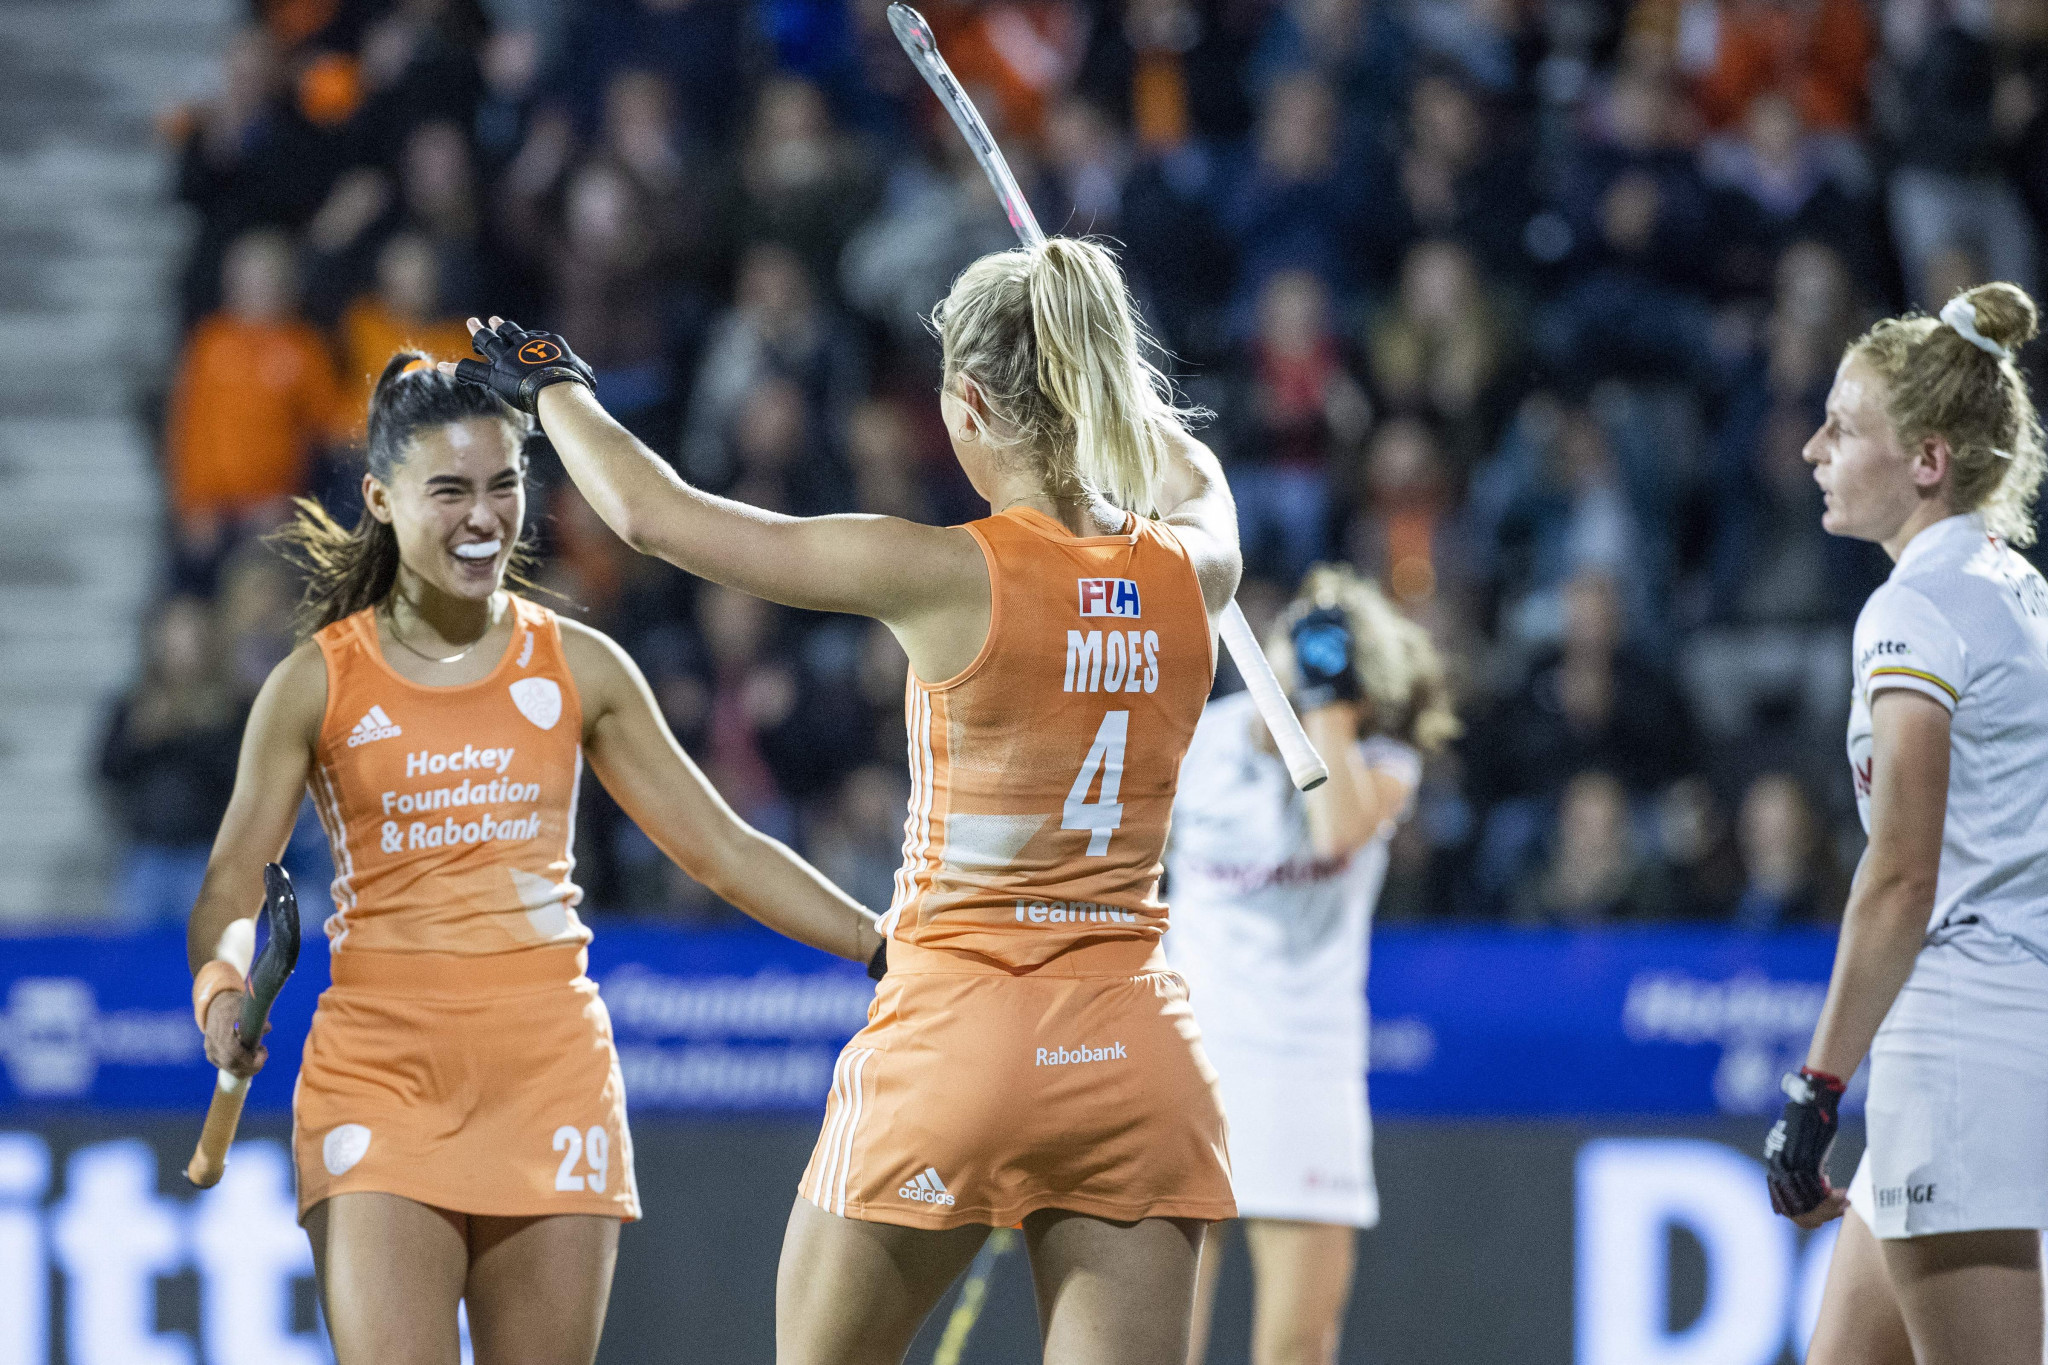 Netherlands beat Germany to clinch fourth Women's Junior Hockey World Cup